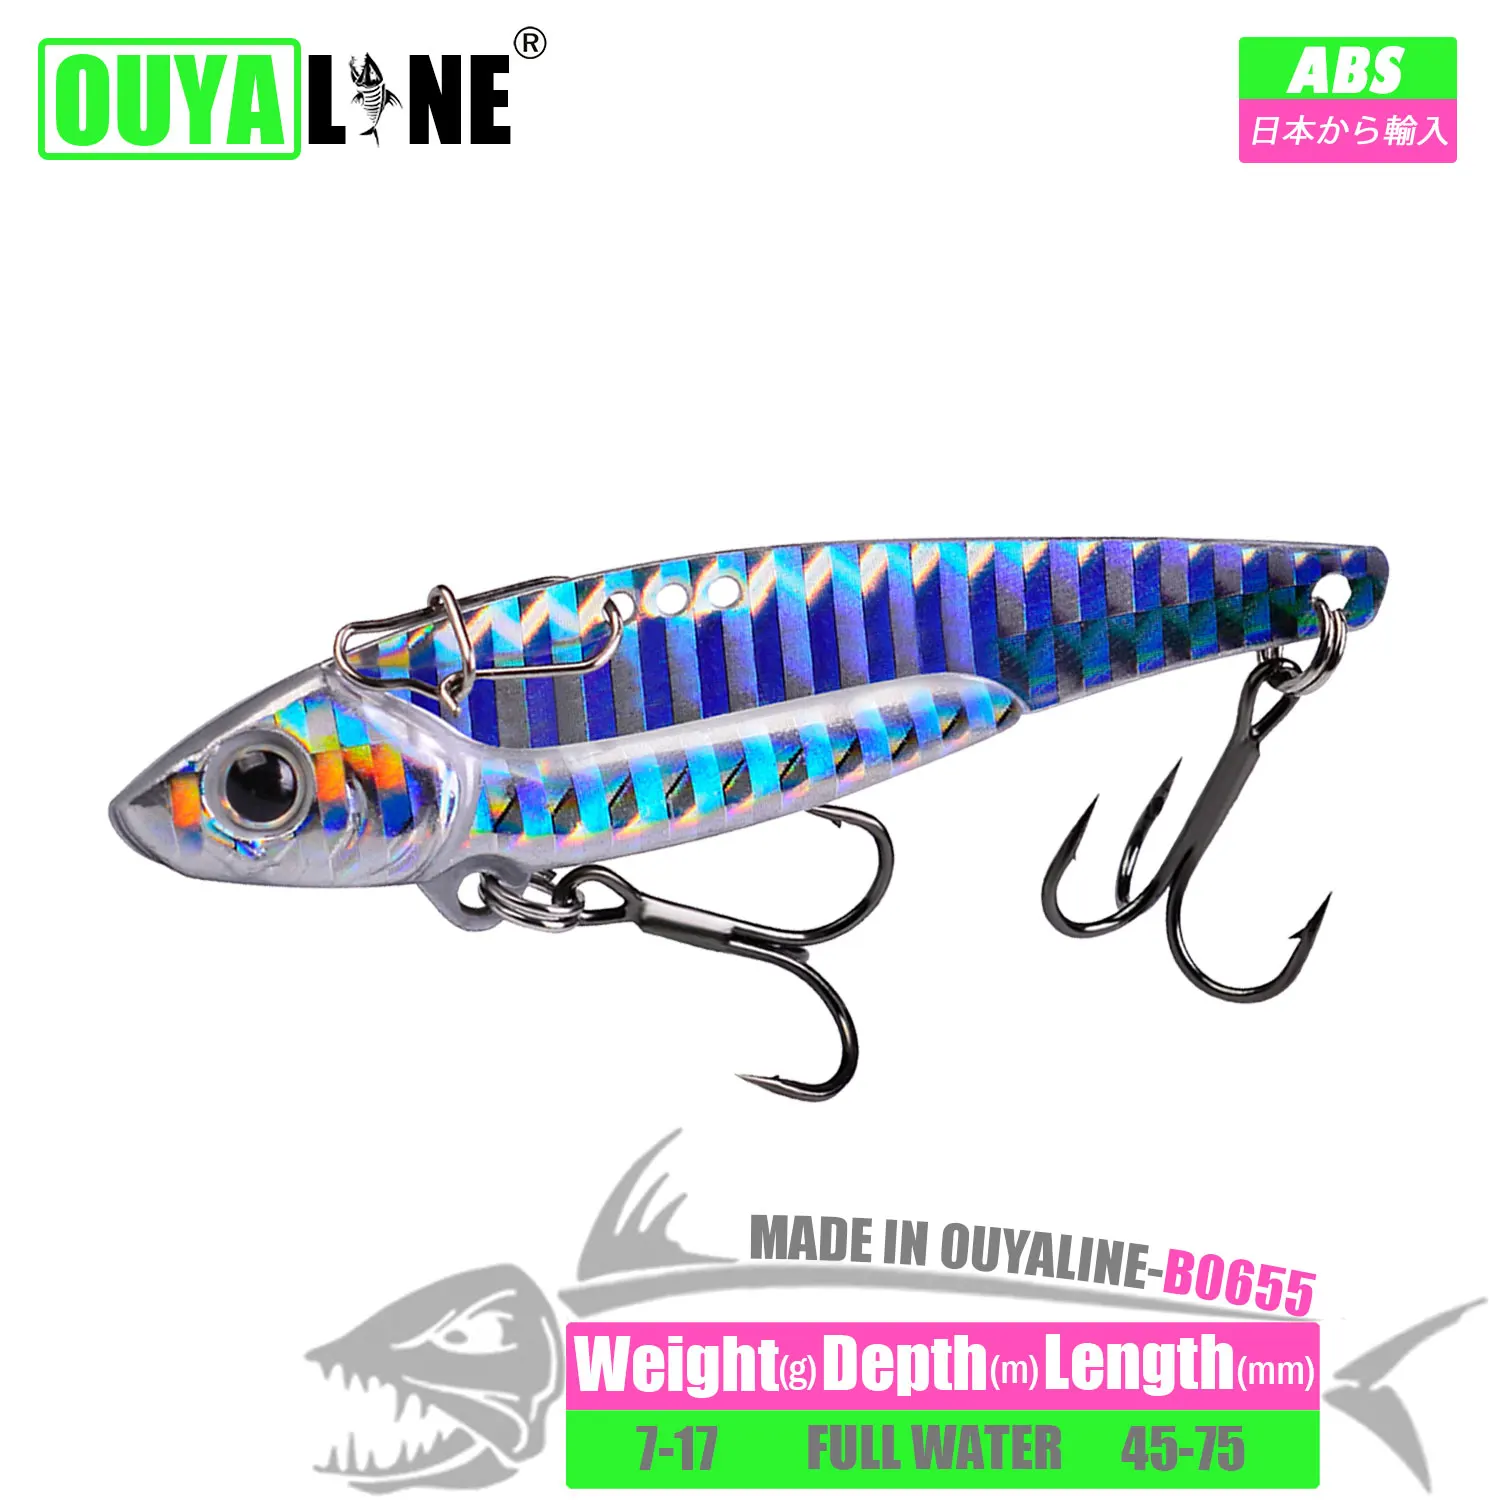 

Metal Vib Blade Fishing Lure 7g/12g/17g Sinking Vibration Hard Bait Isca Artificial Trout Bass Pesca For Perch Fish Tackle Goods